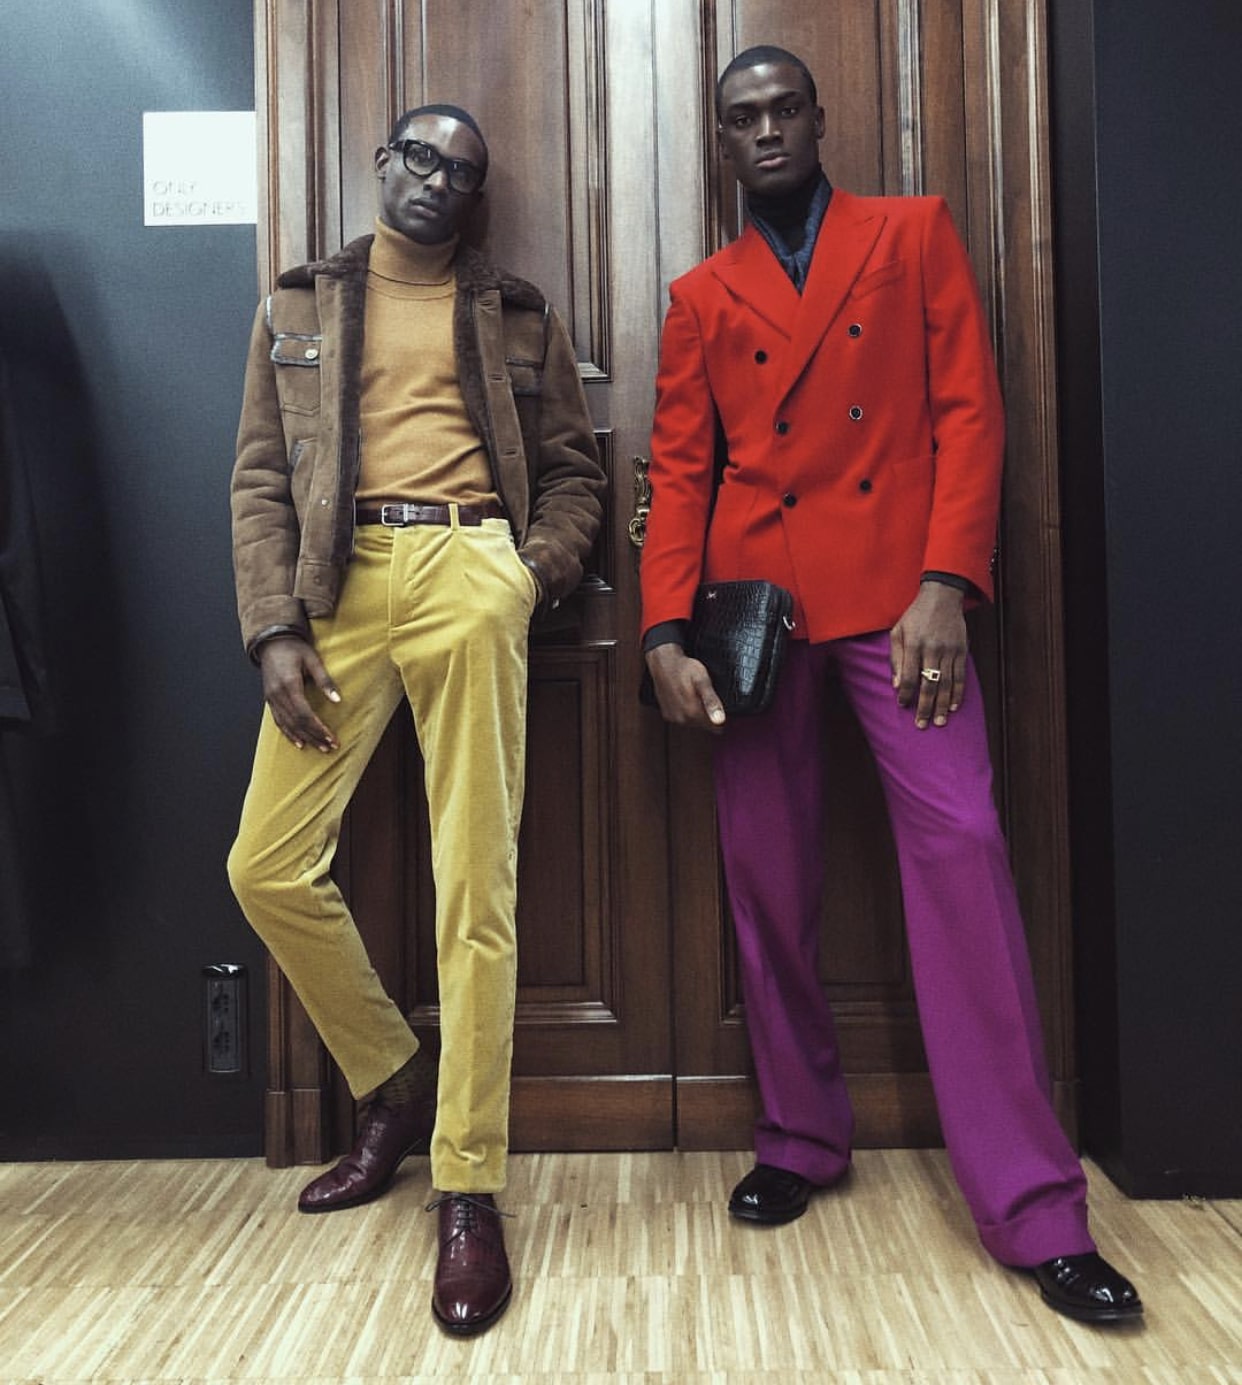 victor-ndigwe-davidson-obennebo-most-defining-nigerian-fashion-moments-of-the-2010s